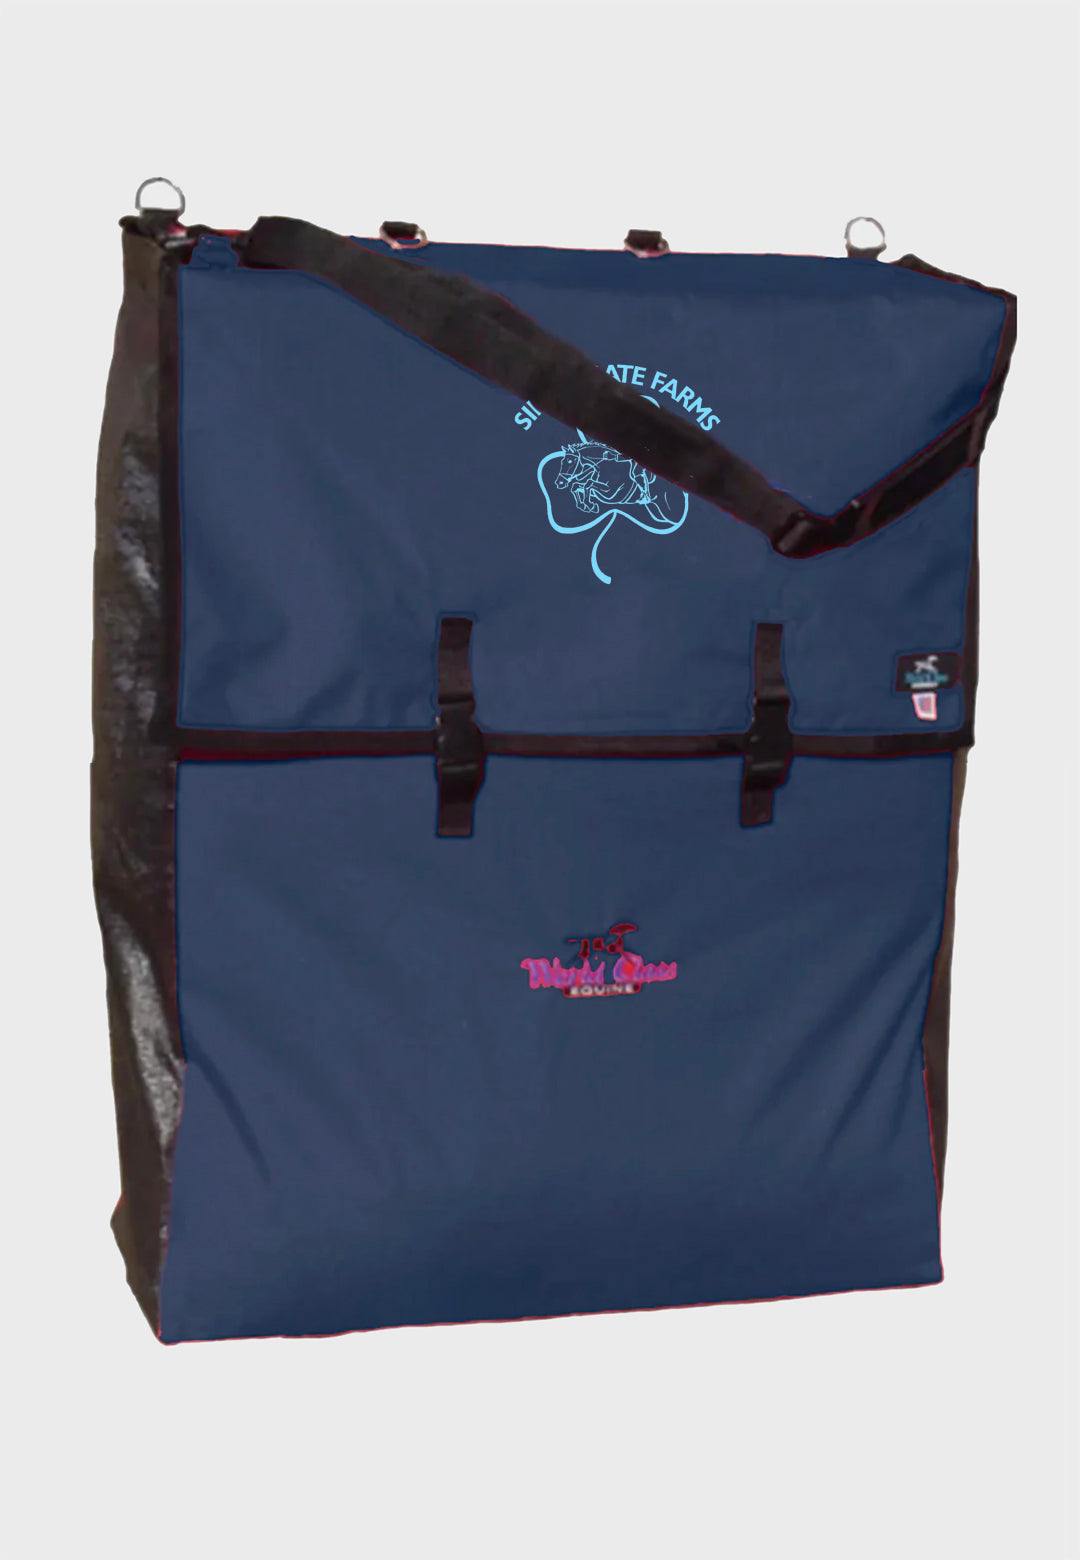 Silver Gate Farms World Class Equine Stall Front Bag - Navy